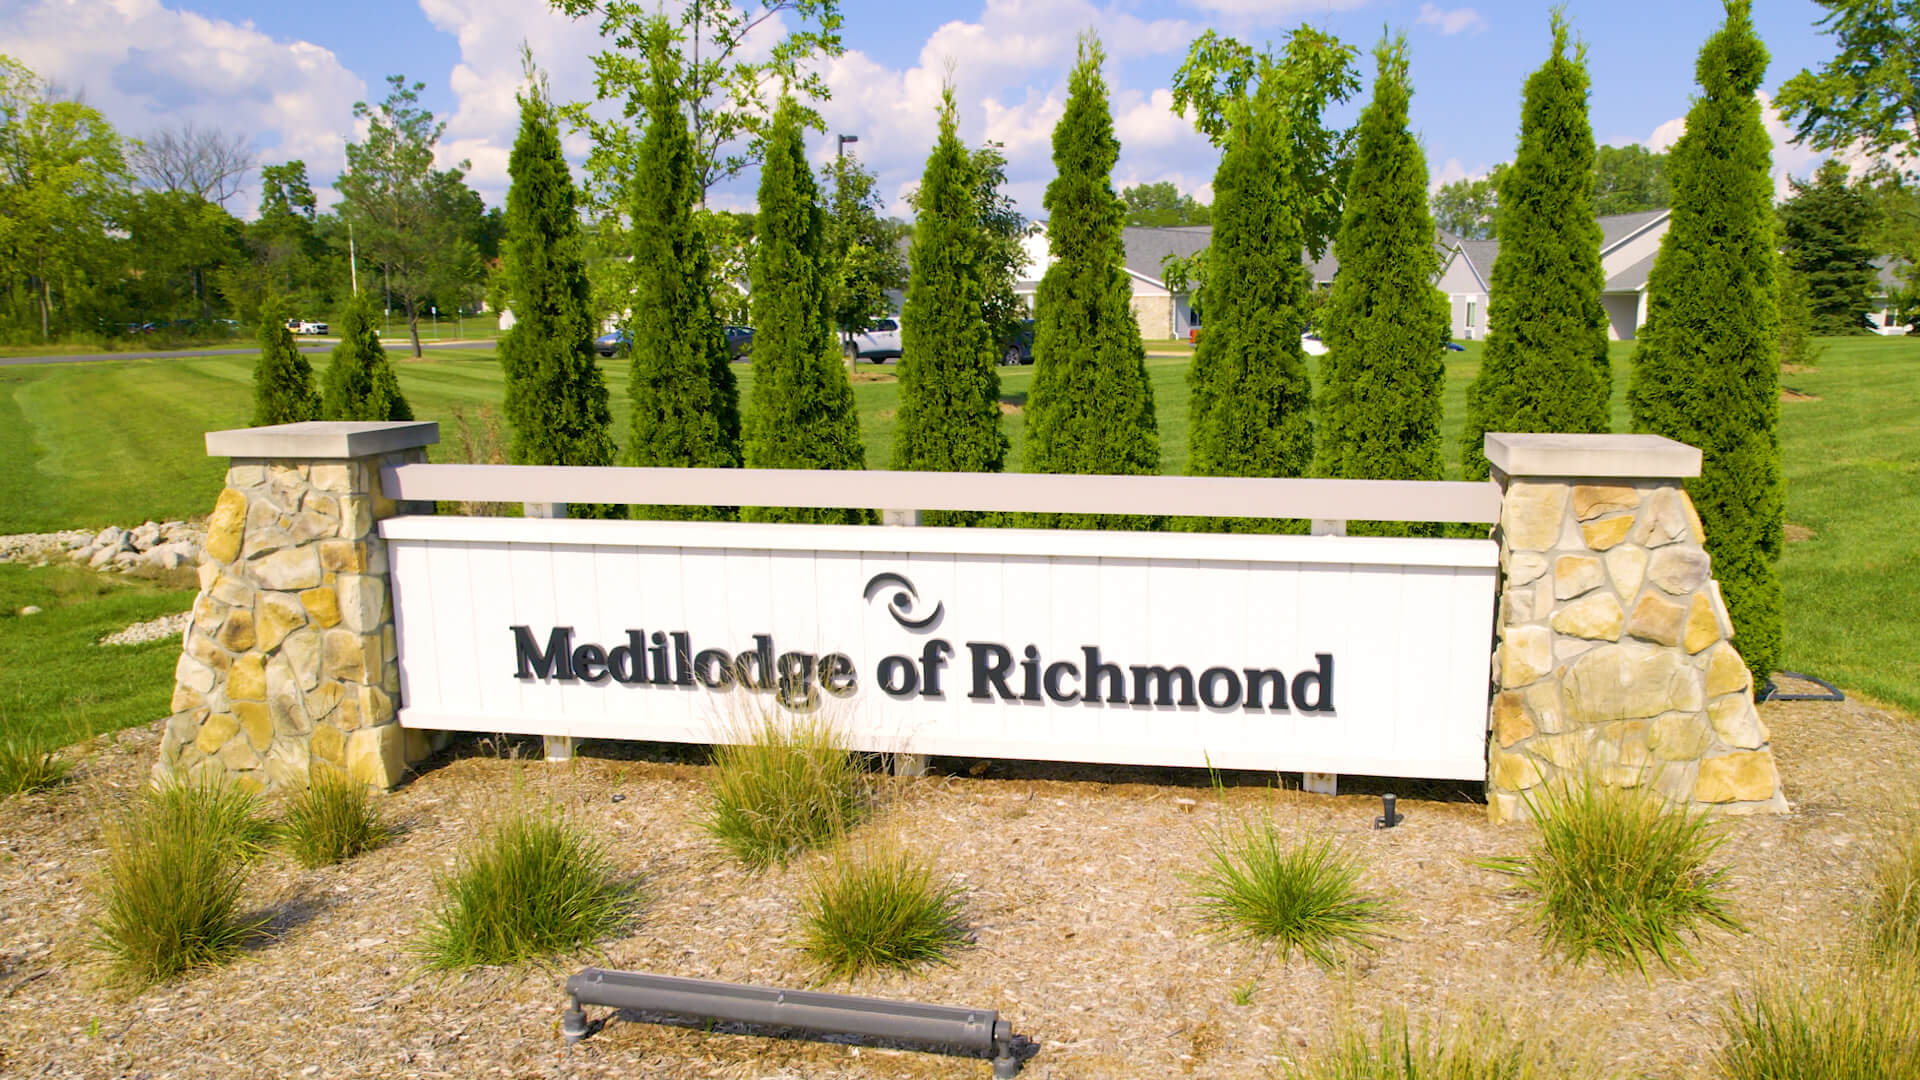 Medilodge of Richmond sign in front of the building.